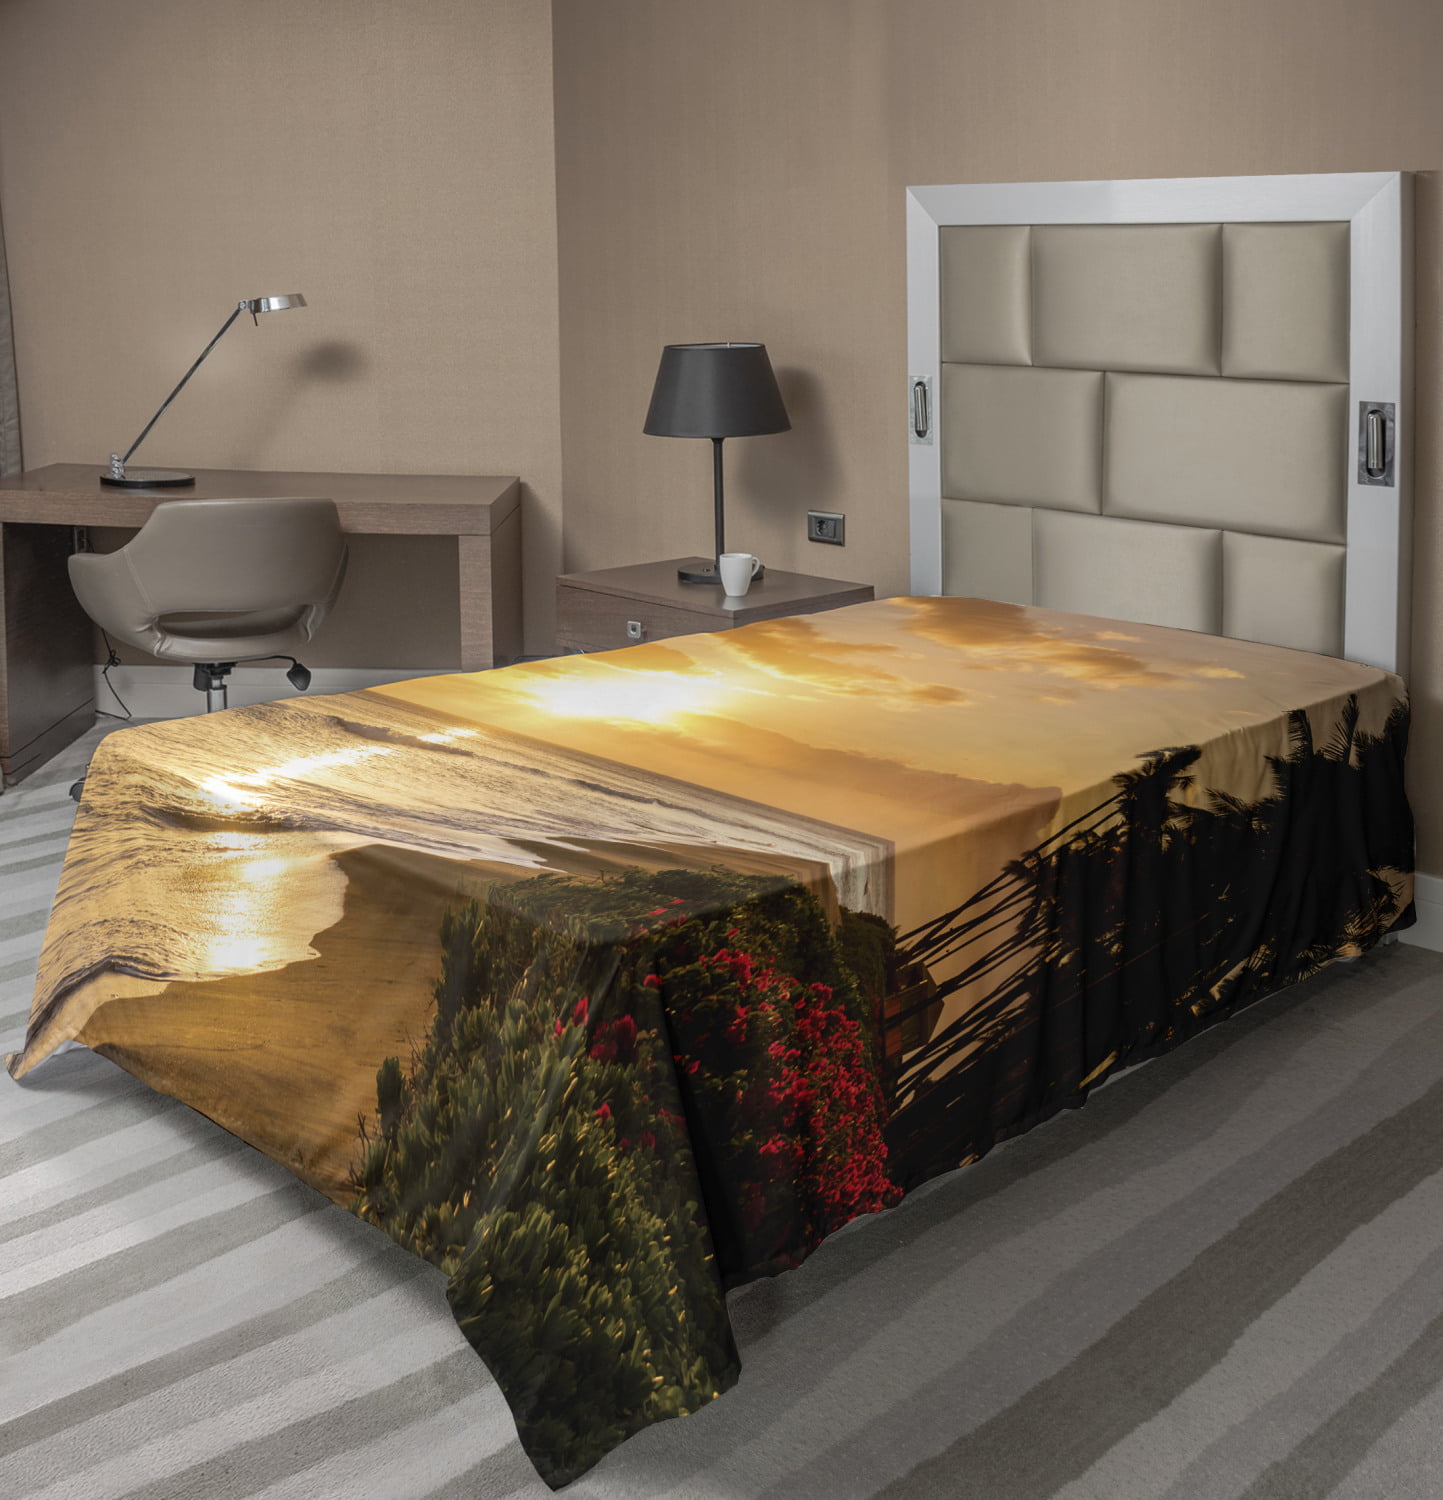 Details about   Ambesonne Leaves Nature Flat Sheet Top Sheet Decorative Bedding 6 Sizes 